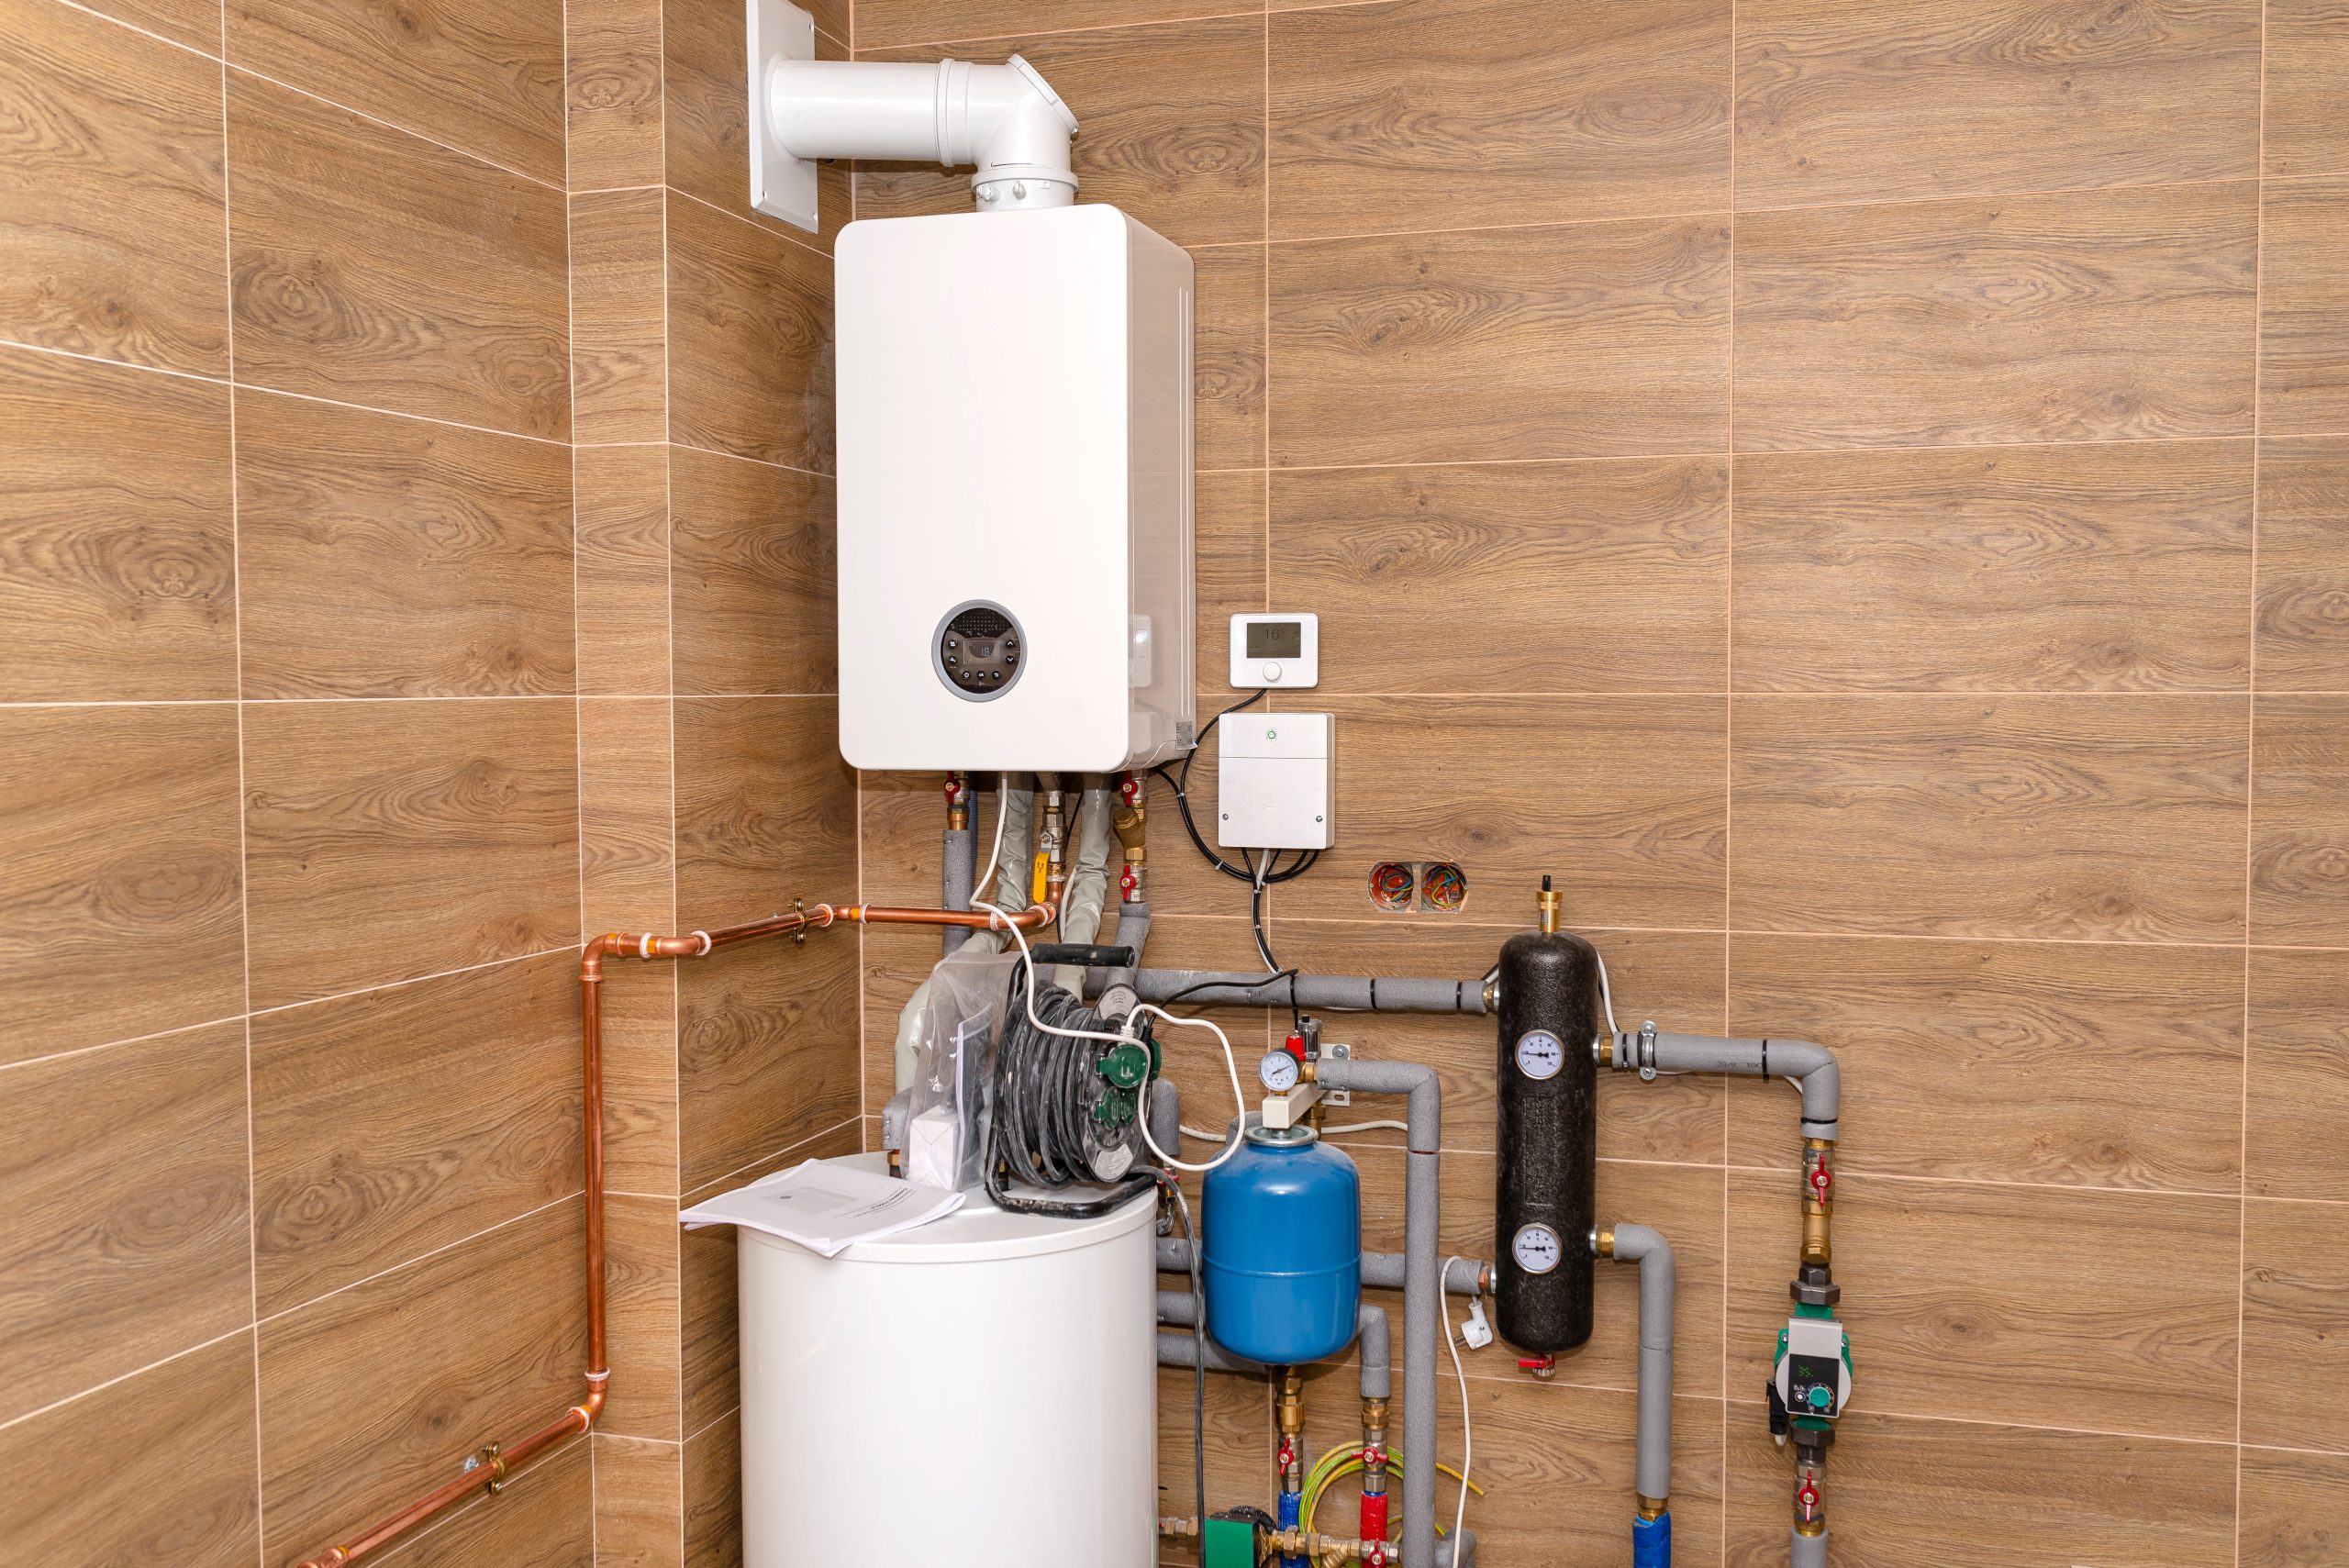 Gas Repairs Perth hot water system Perth Plumbing and Gasfitting